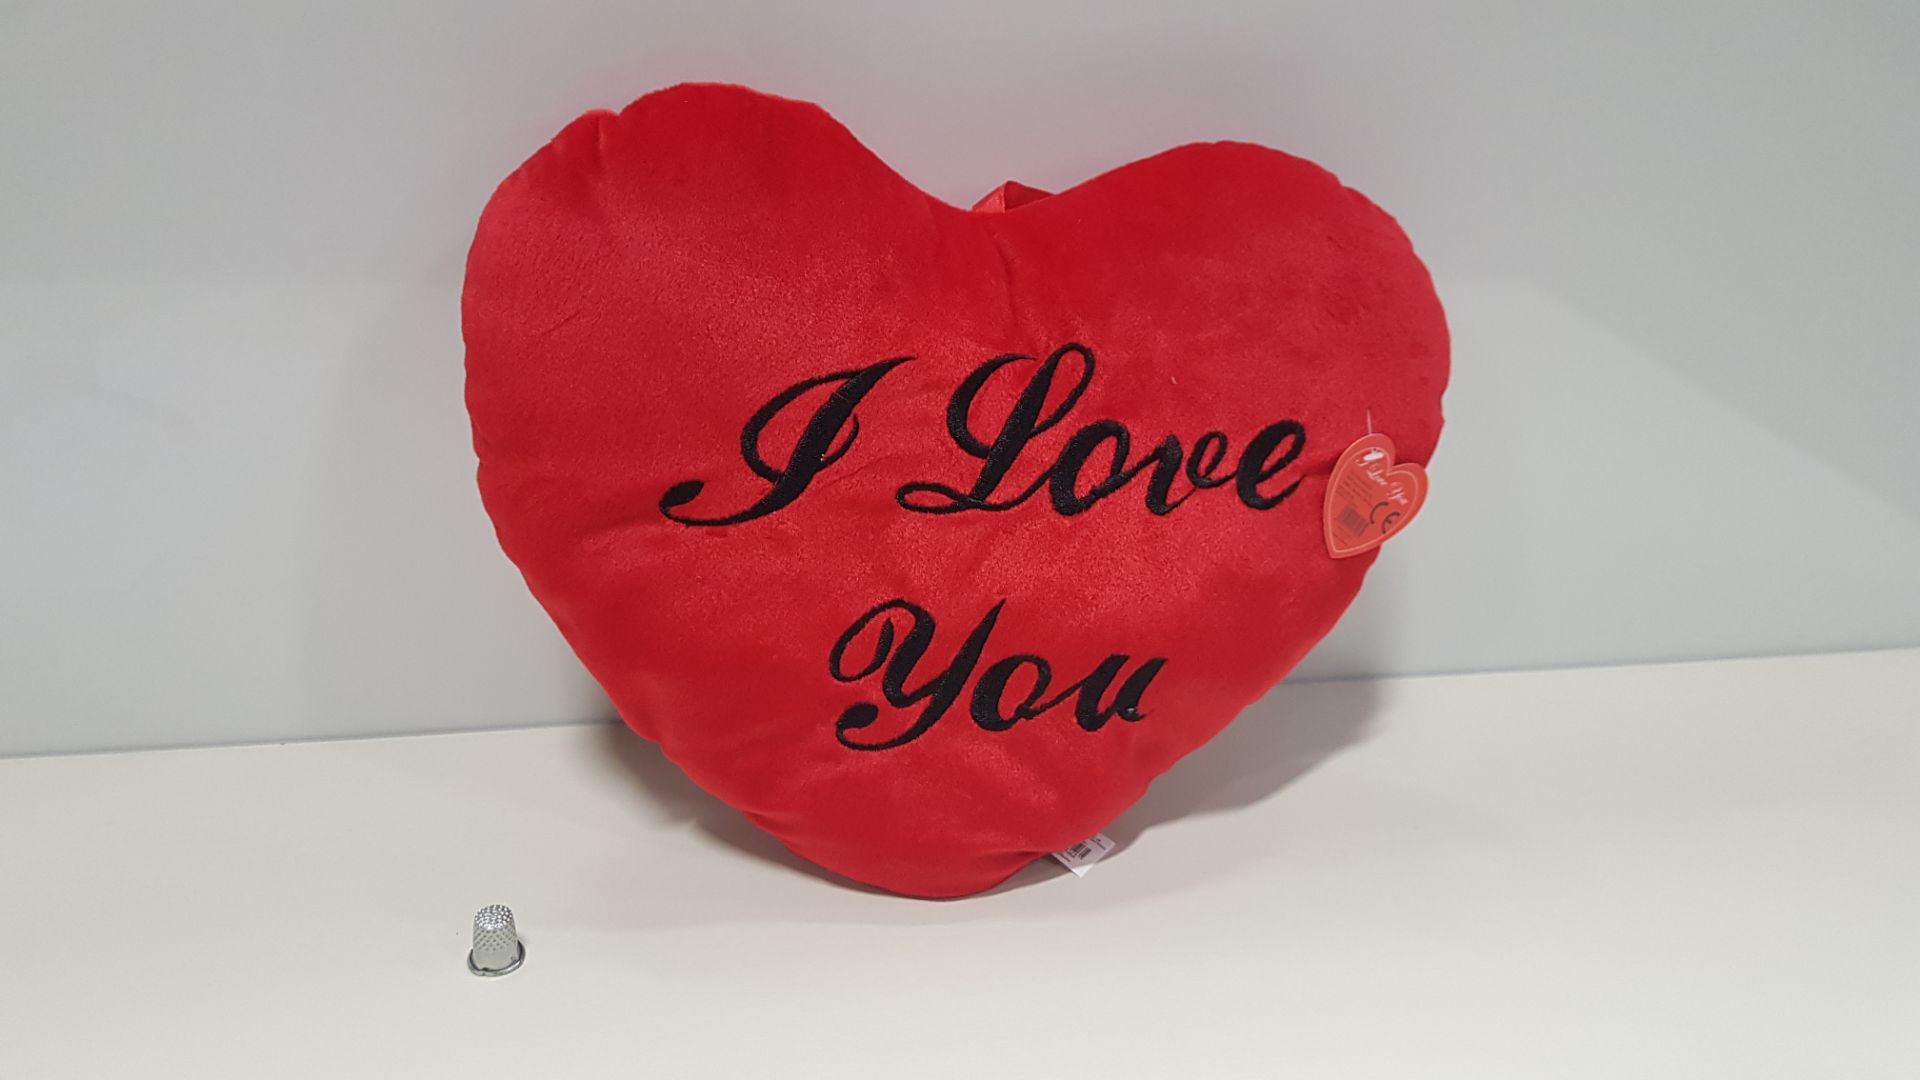 100 X BRAND NEW I LOVE YOU RED HEART SHAPED PILLOW